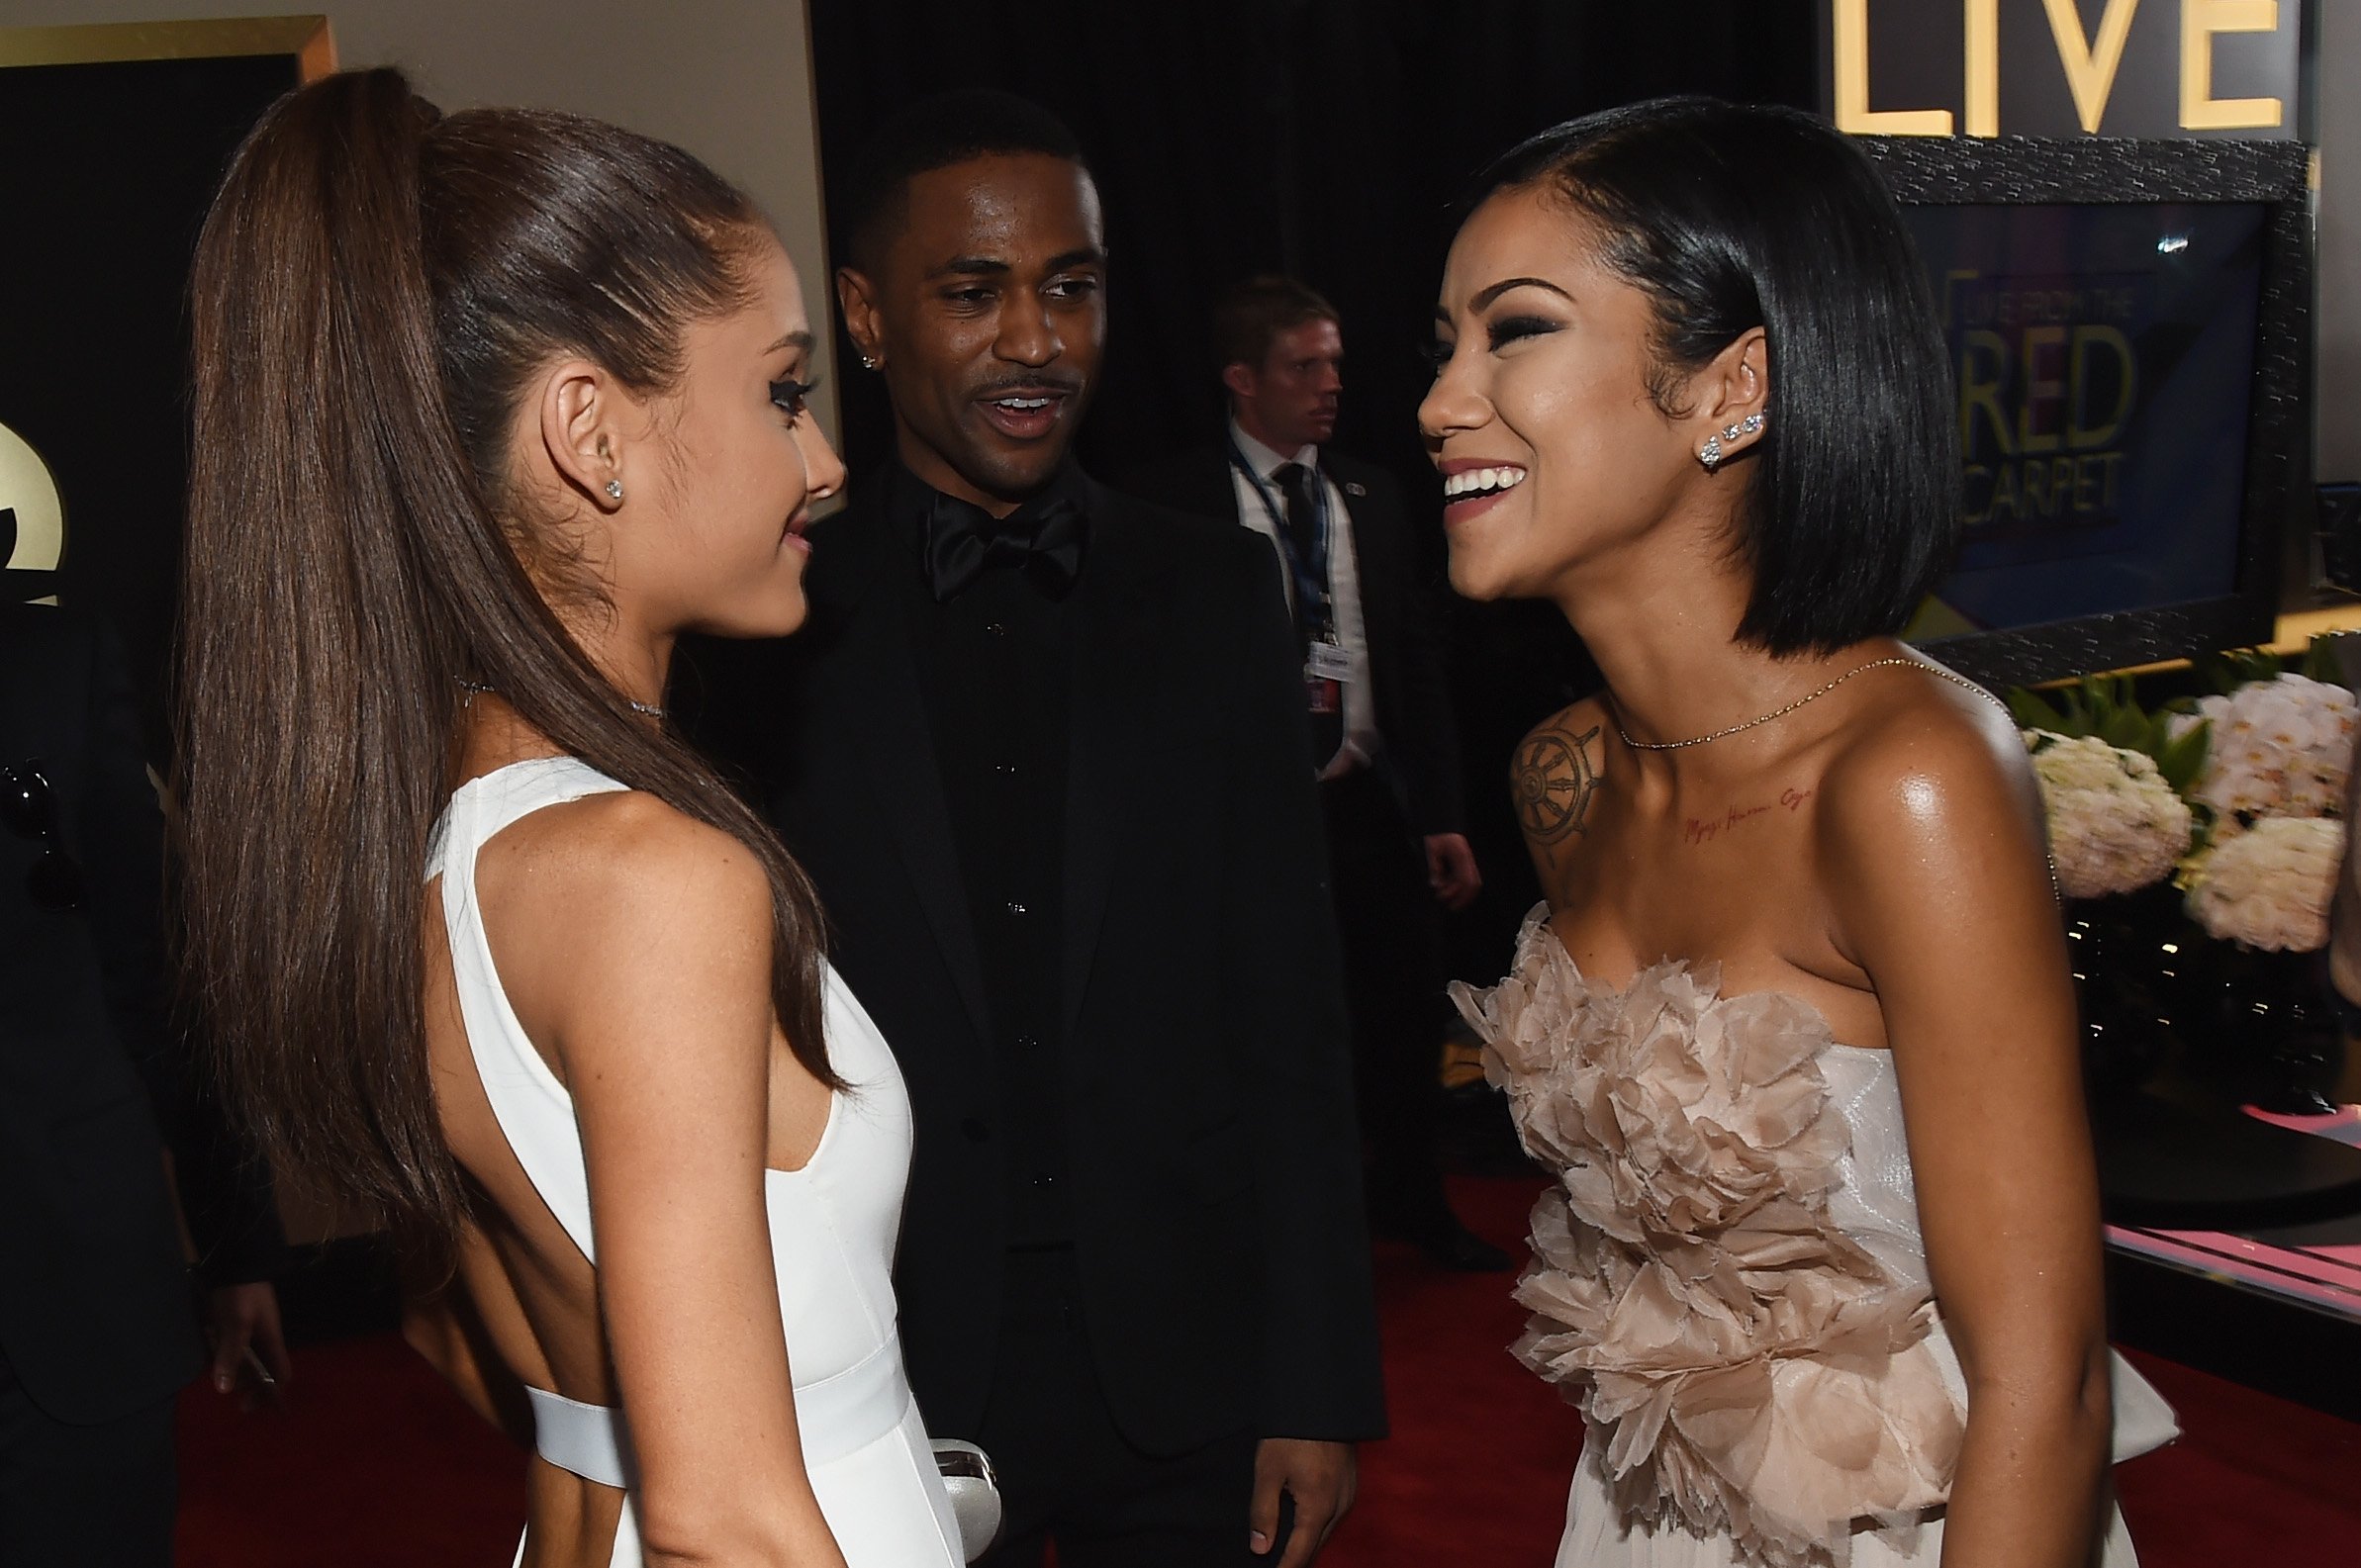 Ariana Grande, Big Sean, and Jhene Aiko attend The 57th Annual GRAMMY Awards on February 8, 2015 in Los Angeles, California